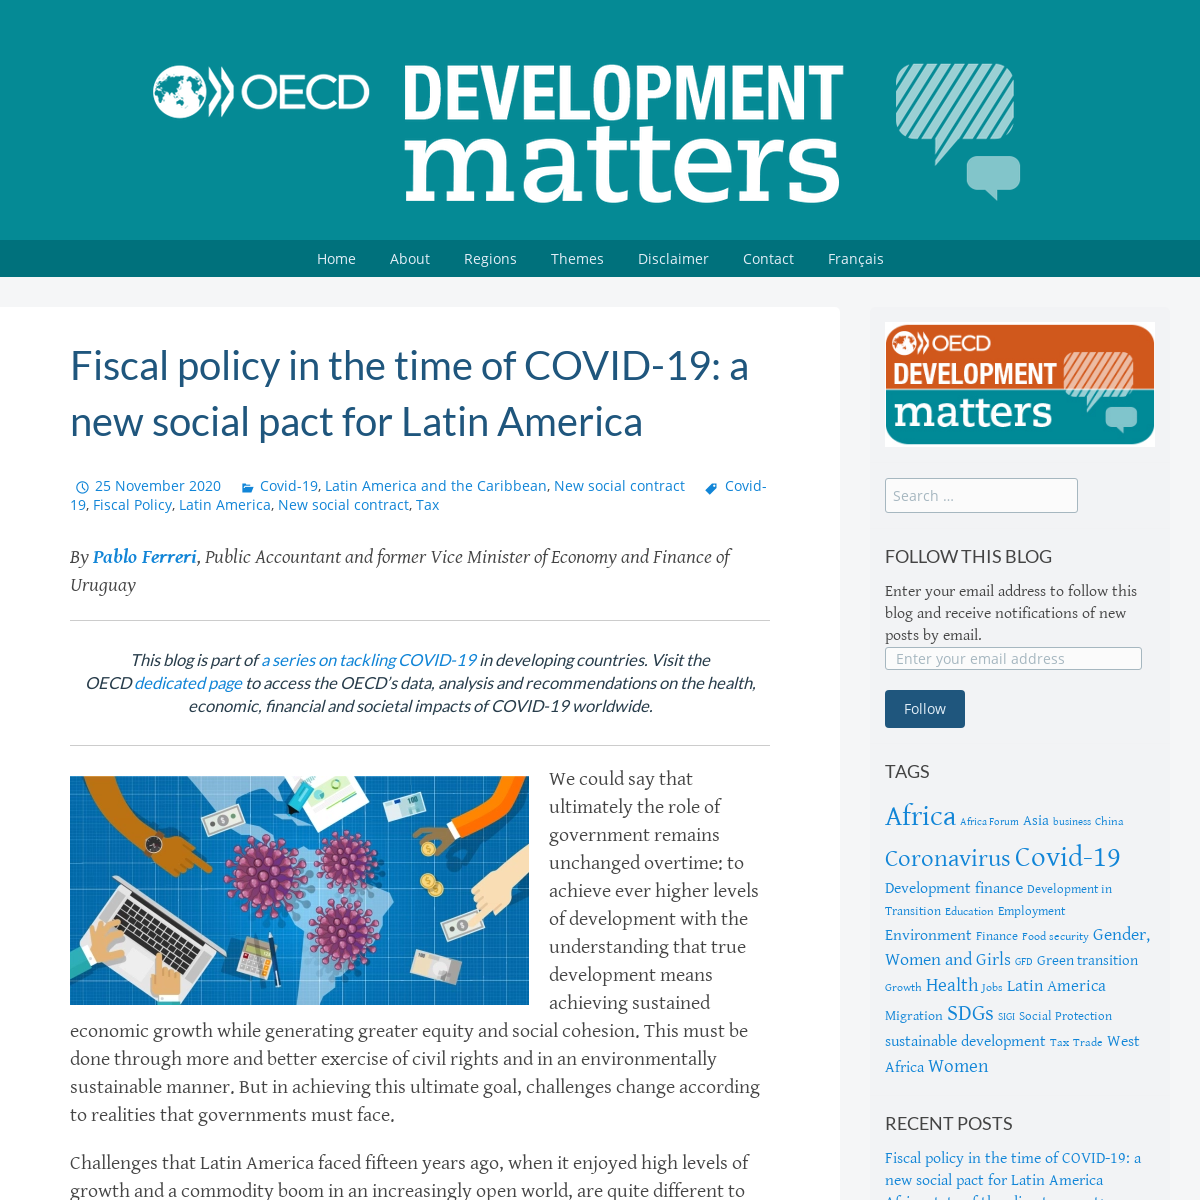 A complete backup of oecd-development-matters.org